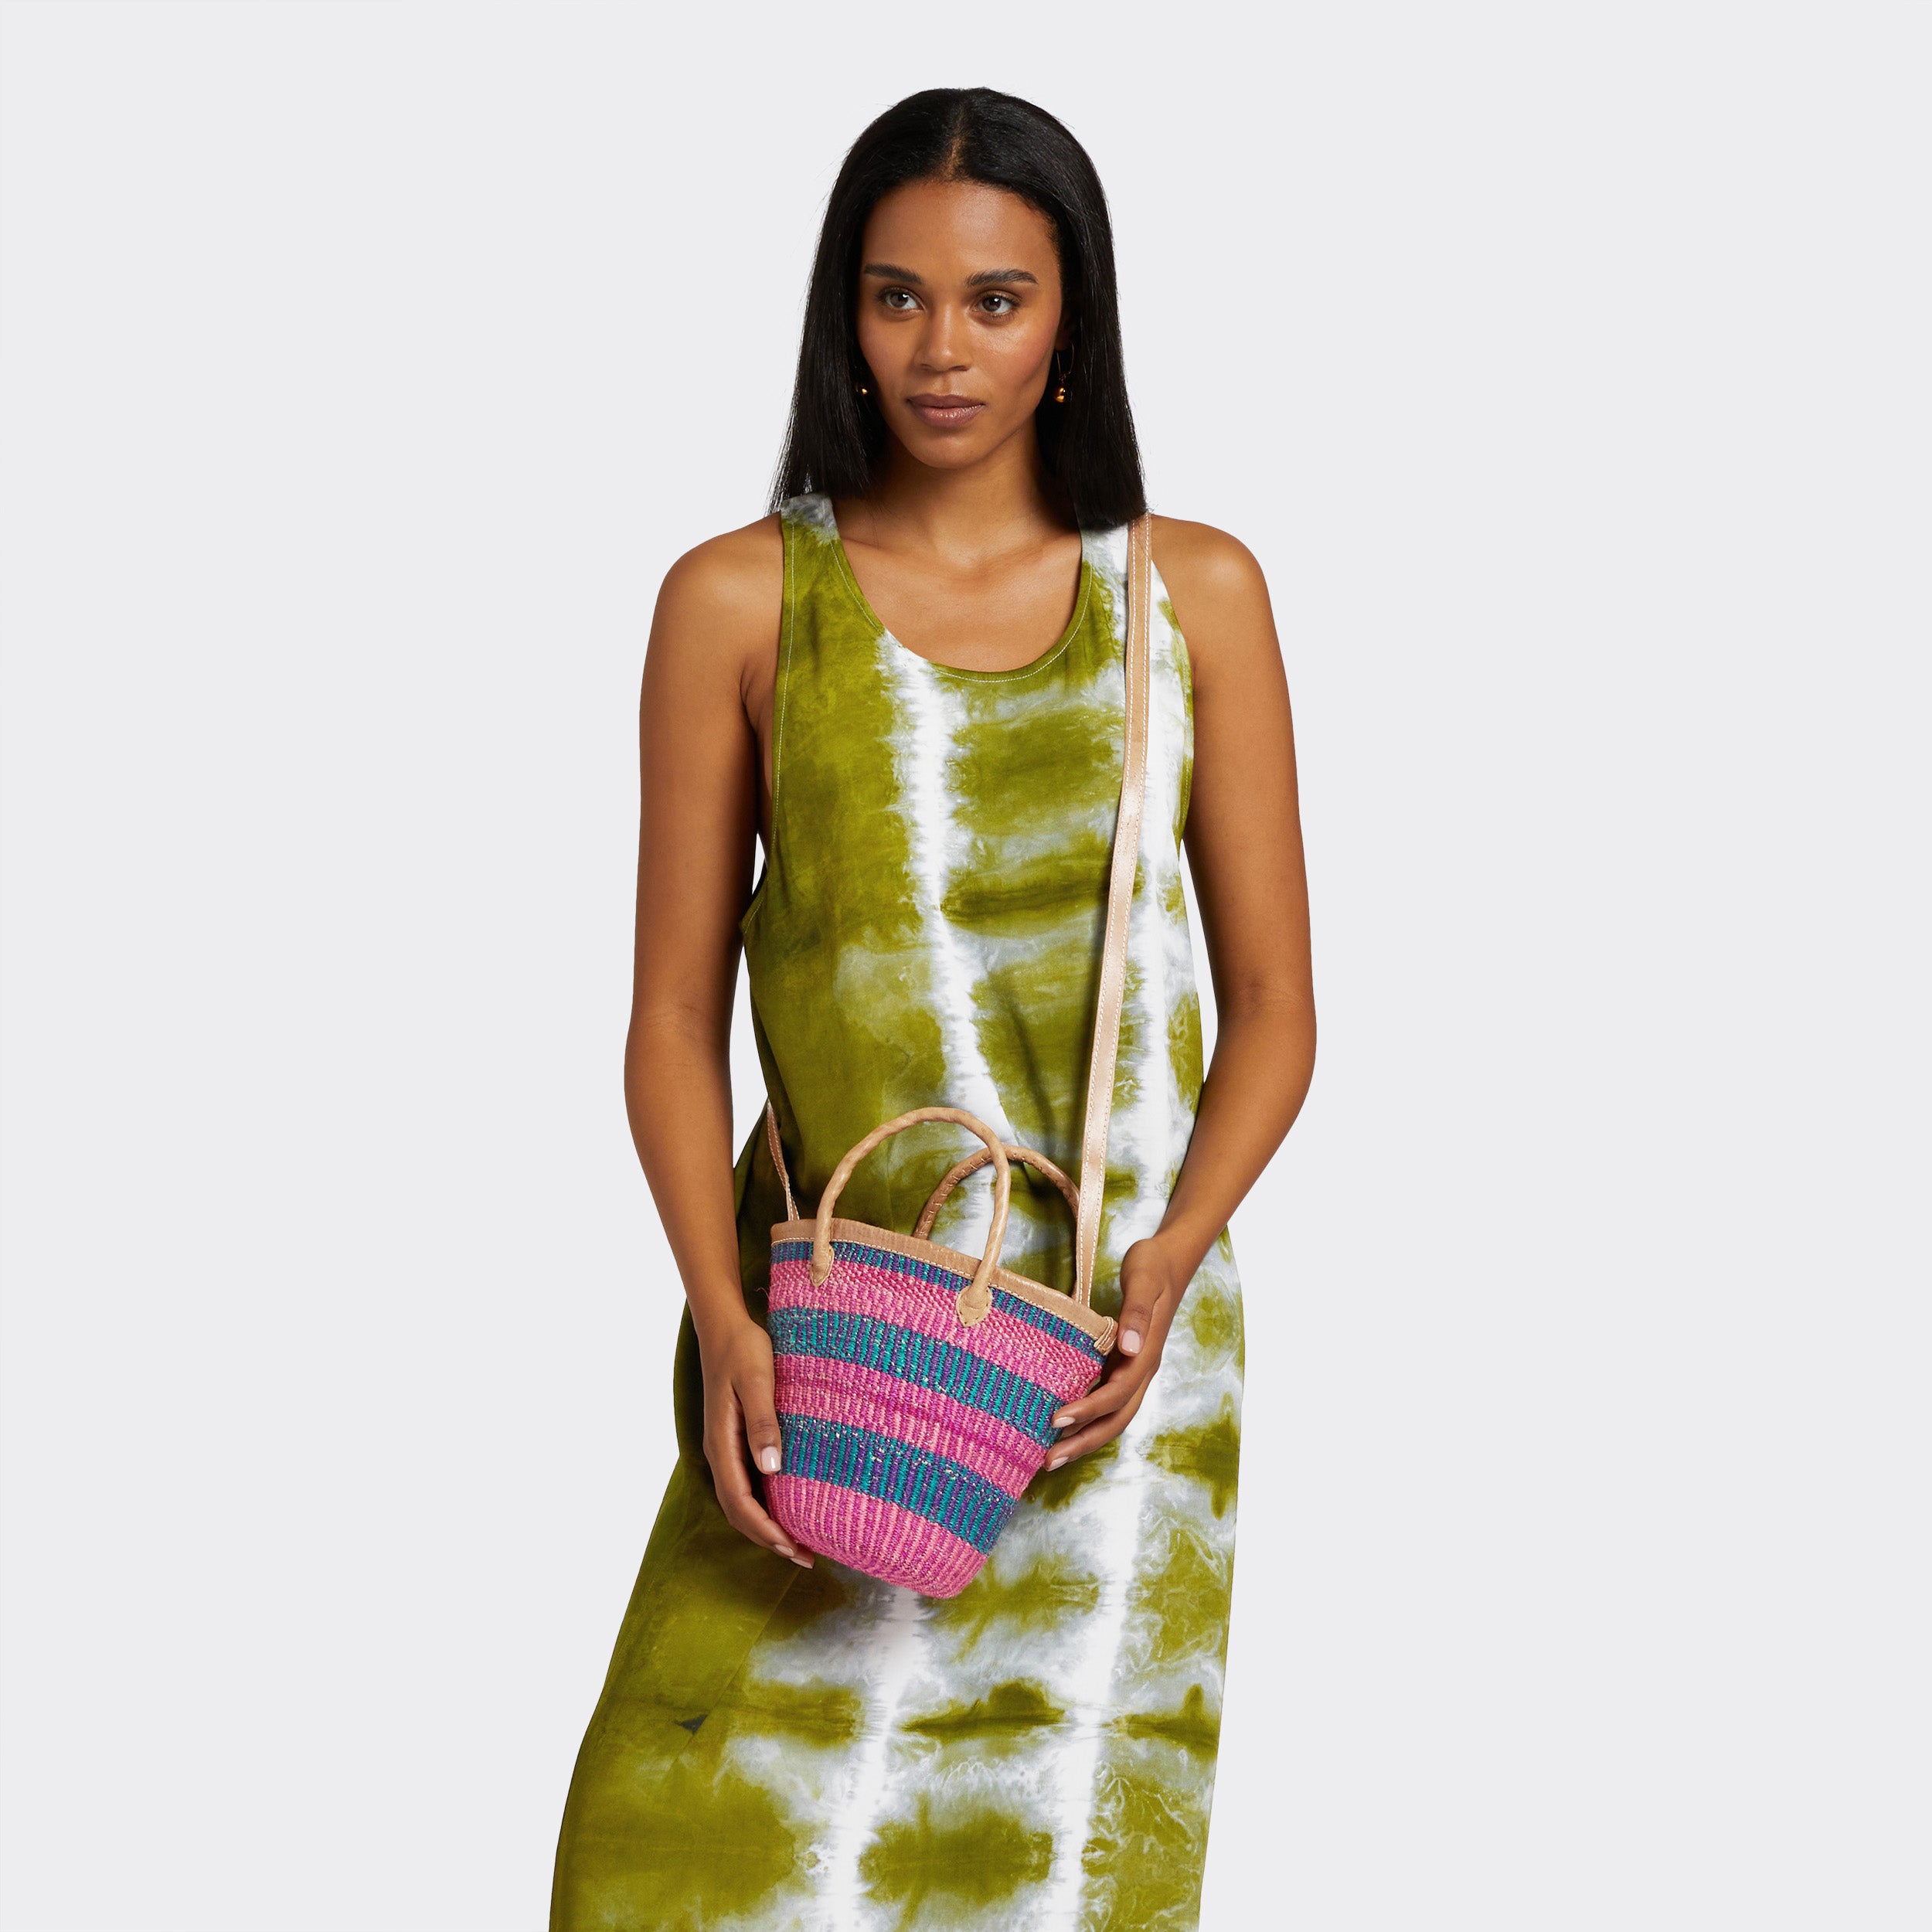 Model is holding the Mini Shopping Bag in Sisal Pink & Blue with the colors pink and blue. She is wearing a Tie Dye Long Dress in Intense Green which has the colors green and white.